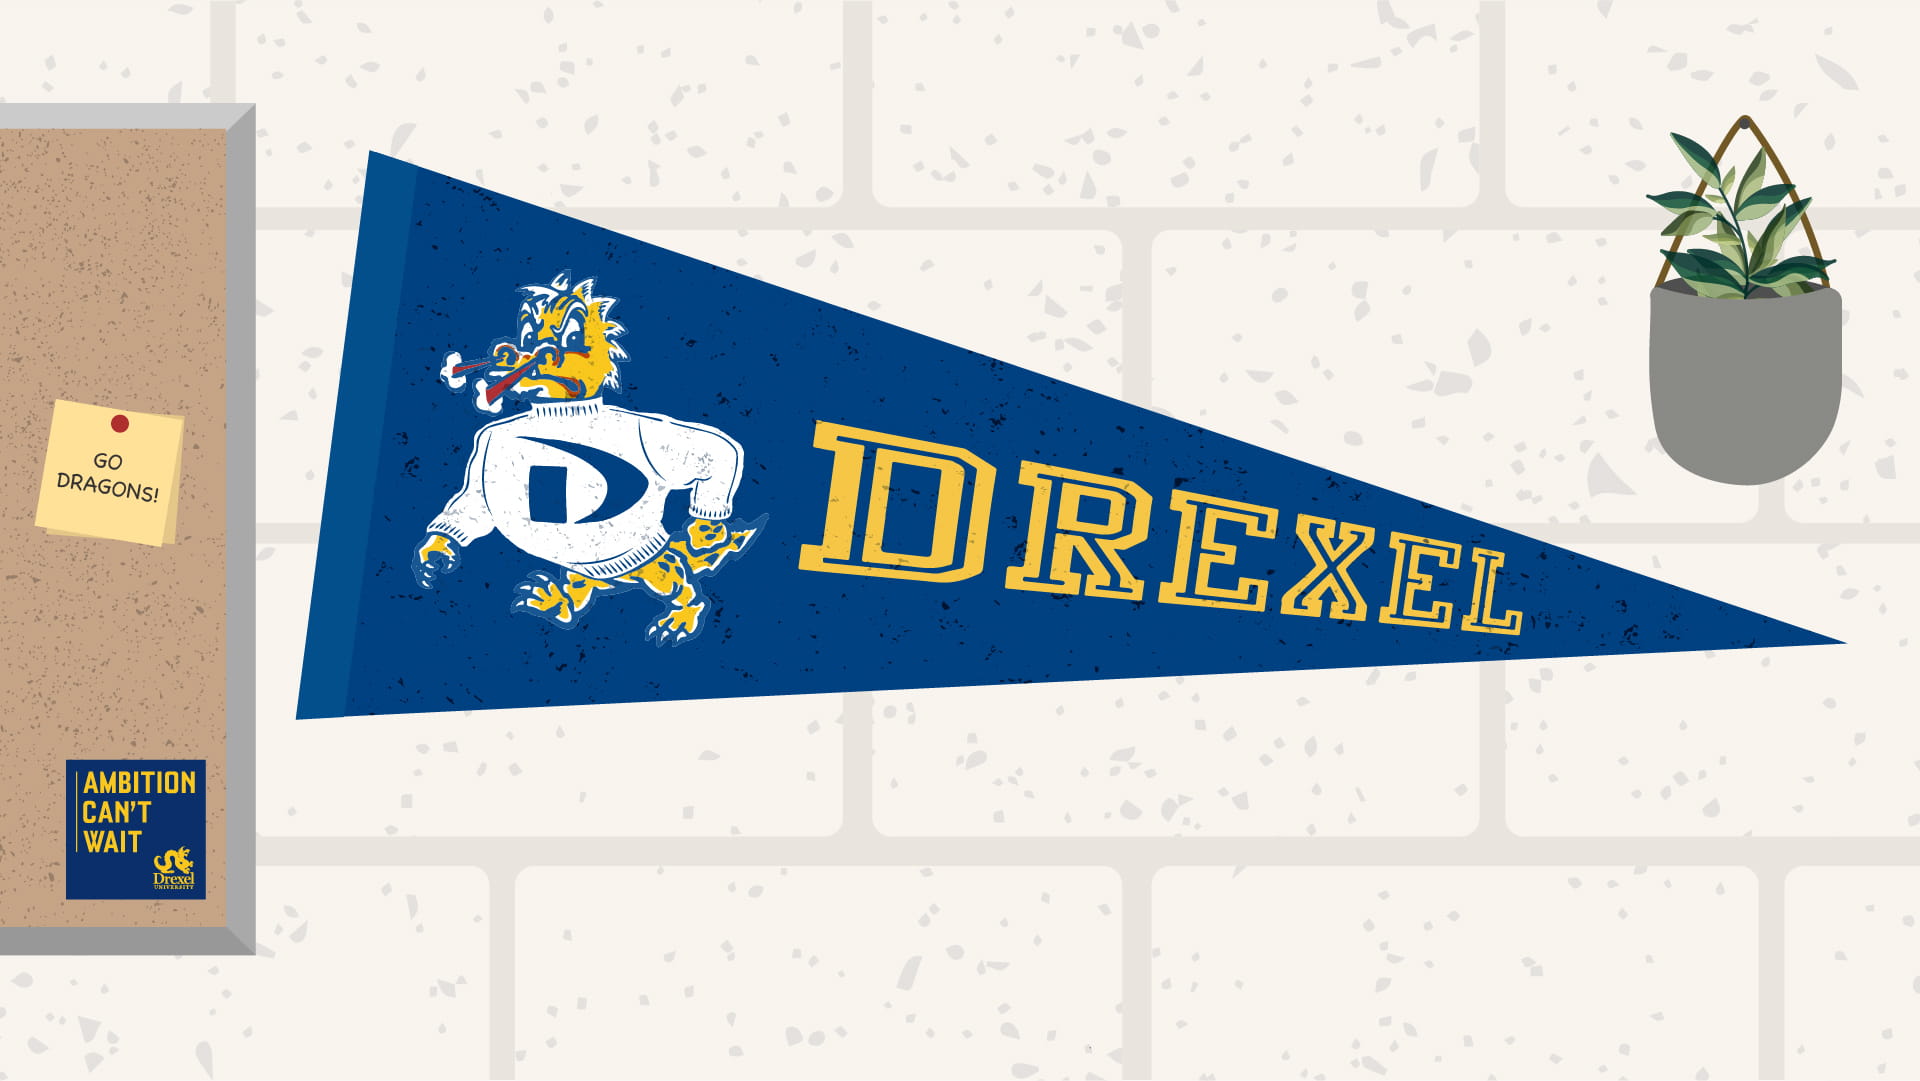 Graphical design of a Drexel University pennant flag